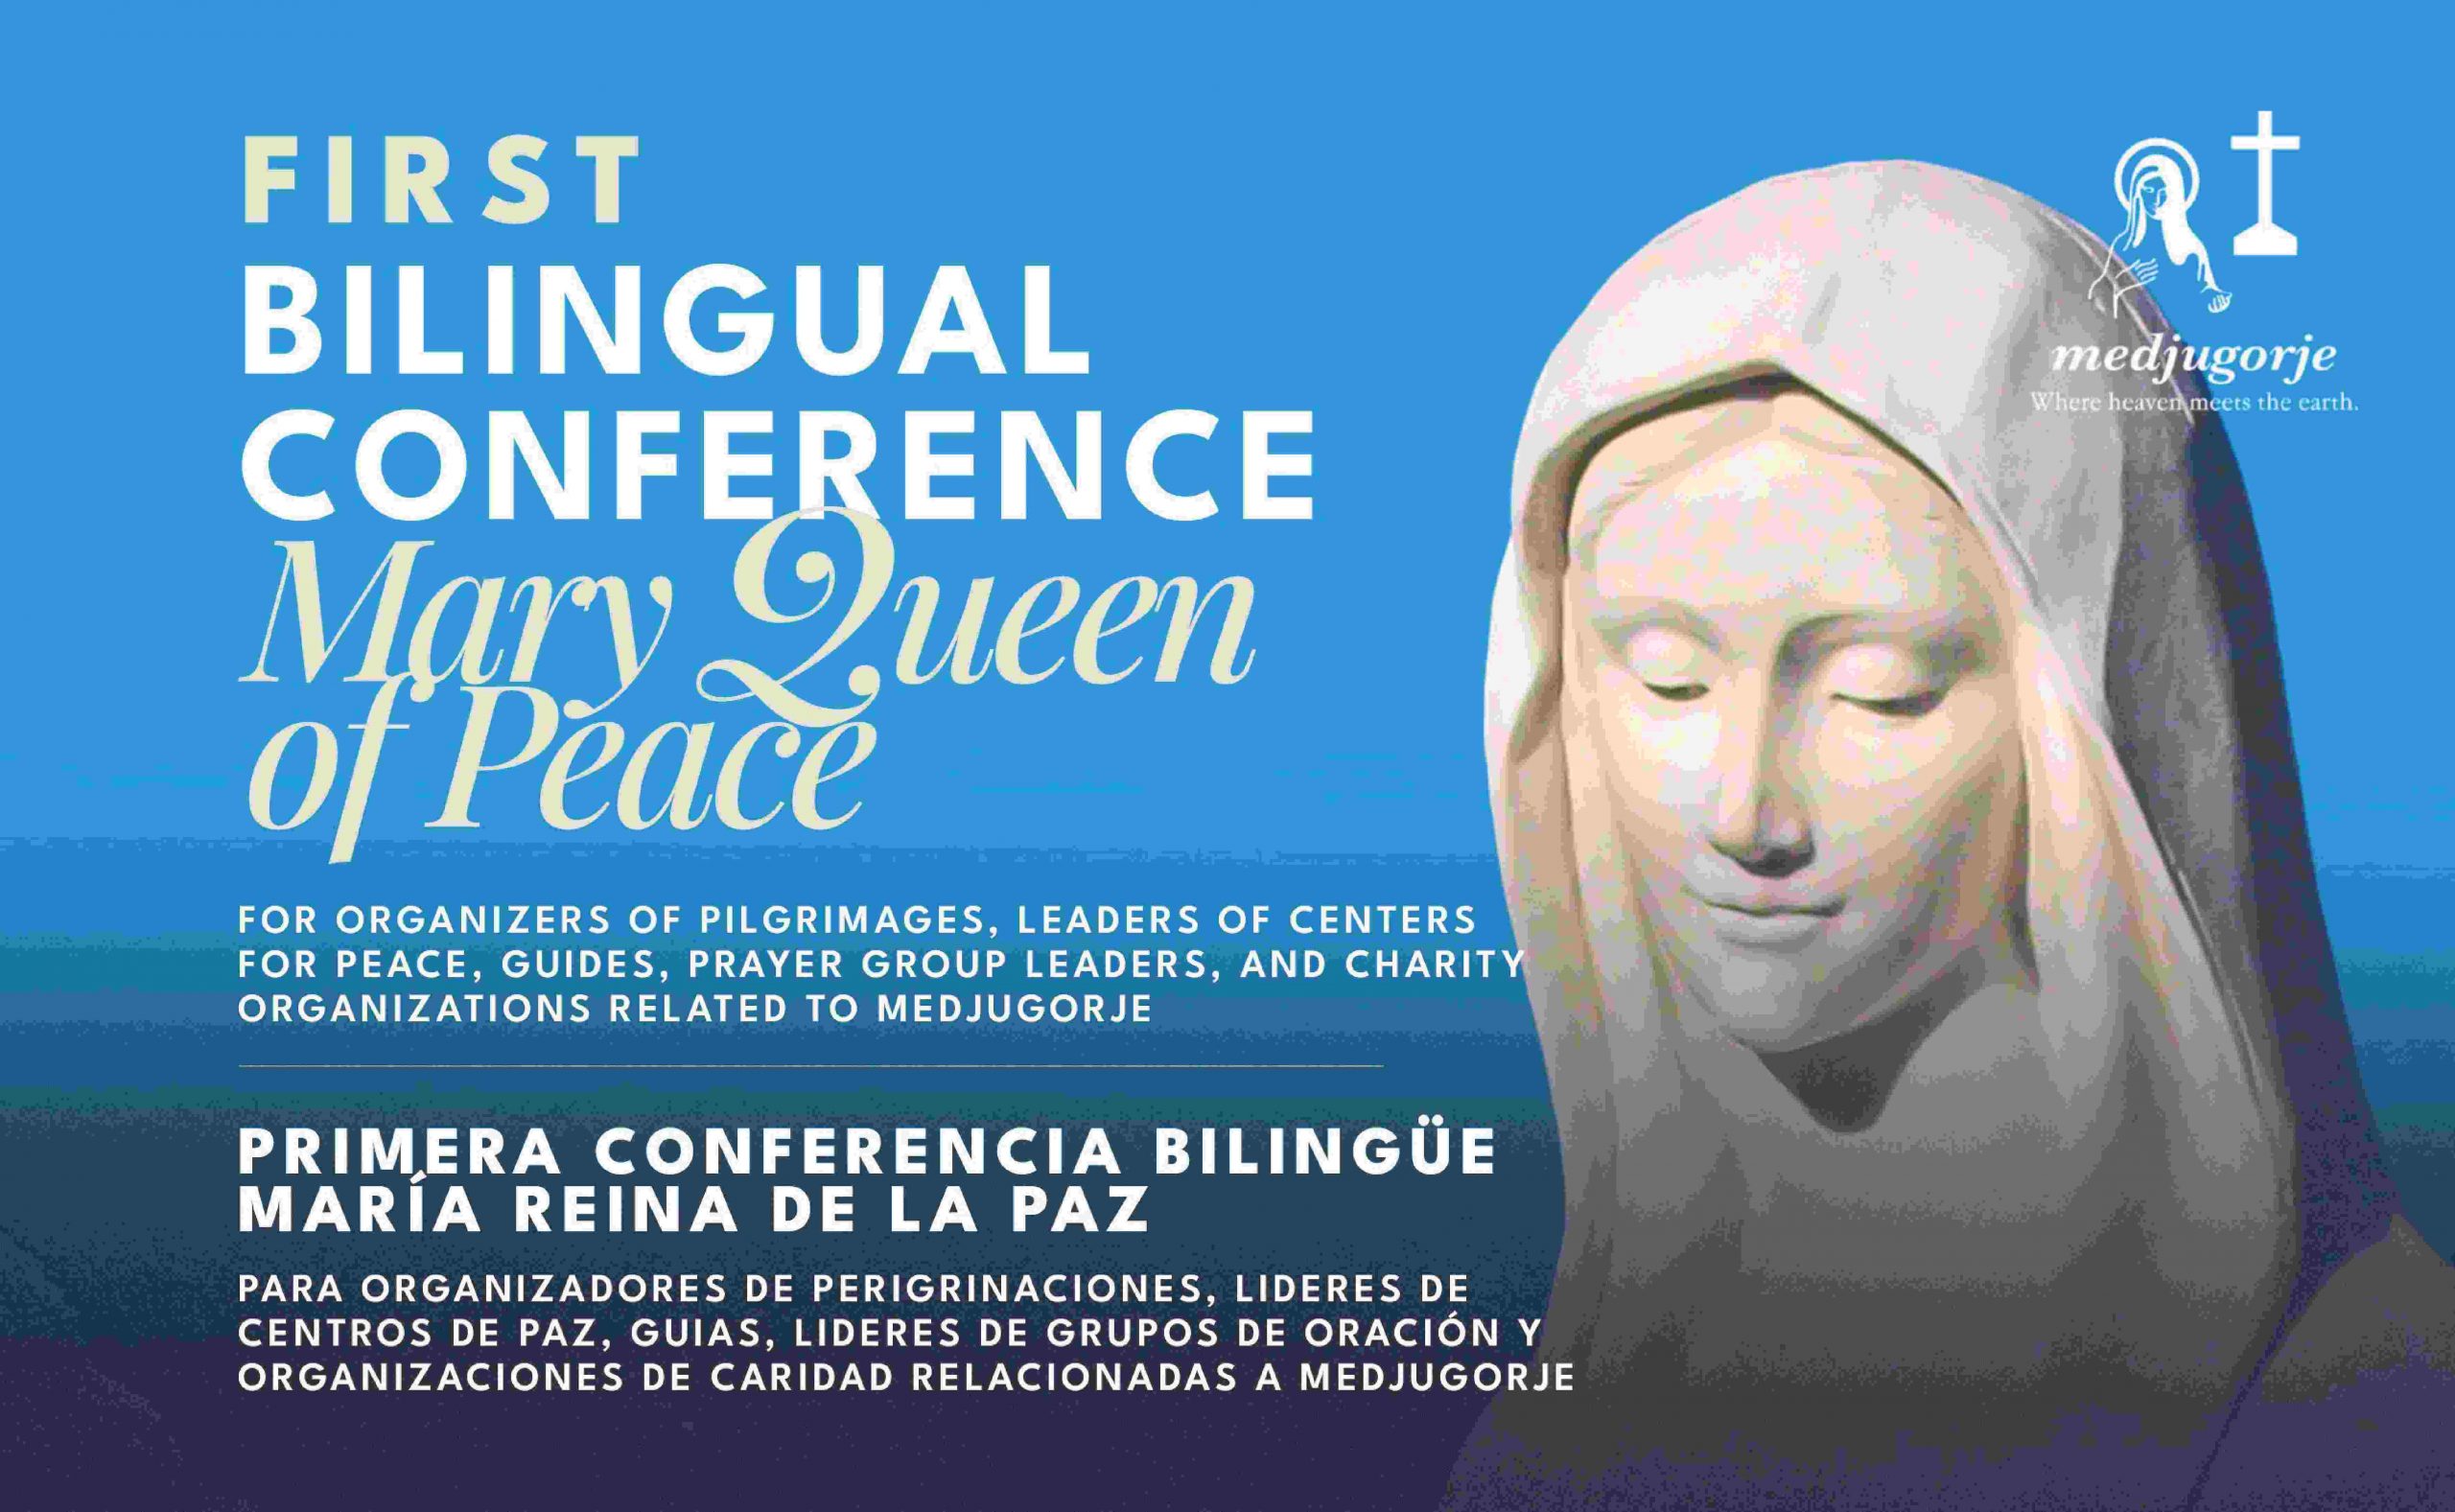 The first bilingual Conference “Mary Queen of Peace” in Miami